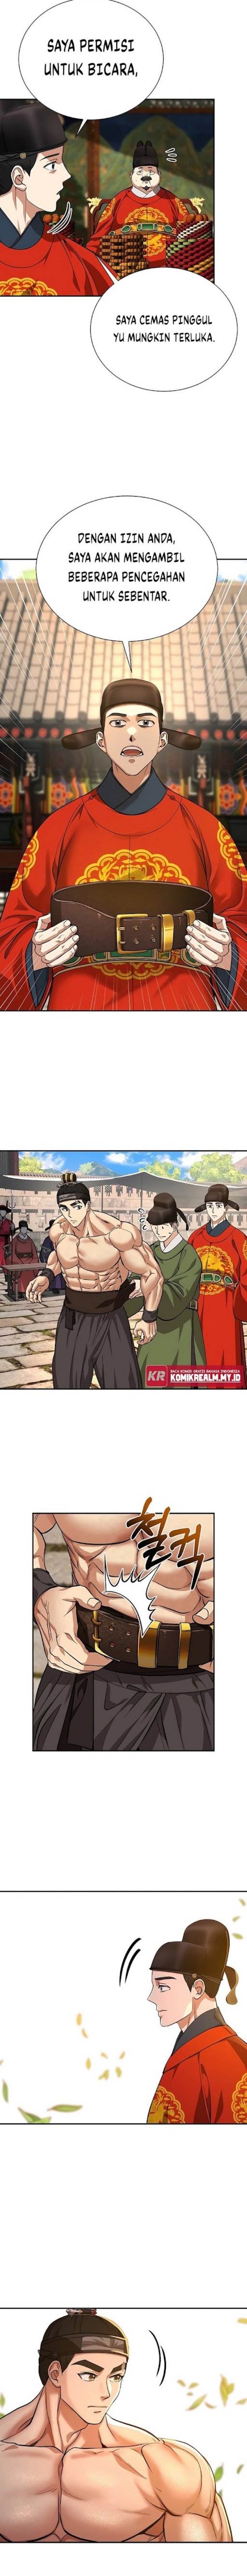 Muscle Joseon Chapter 9